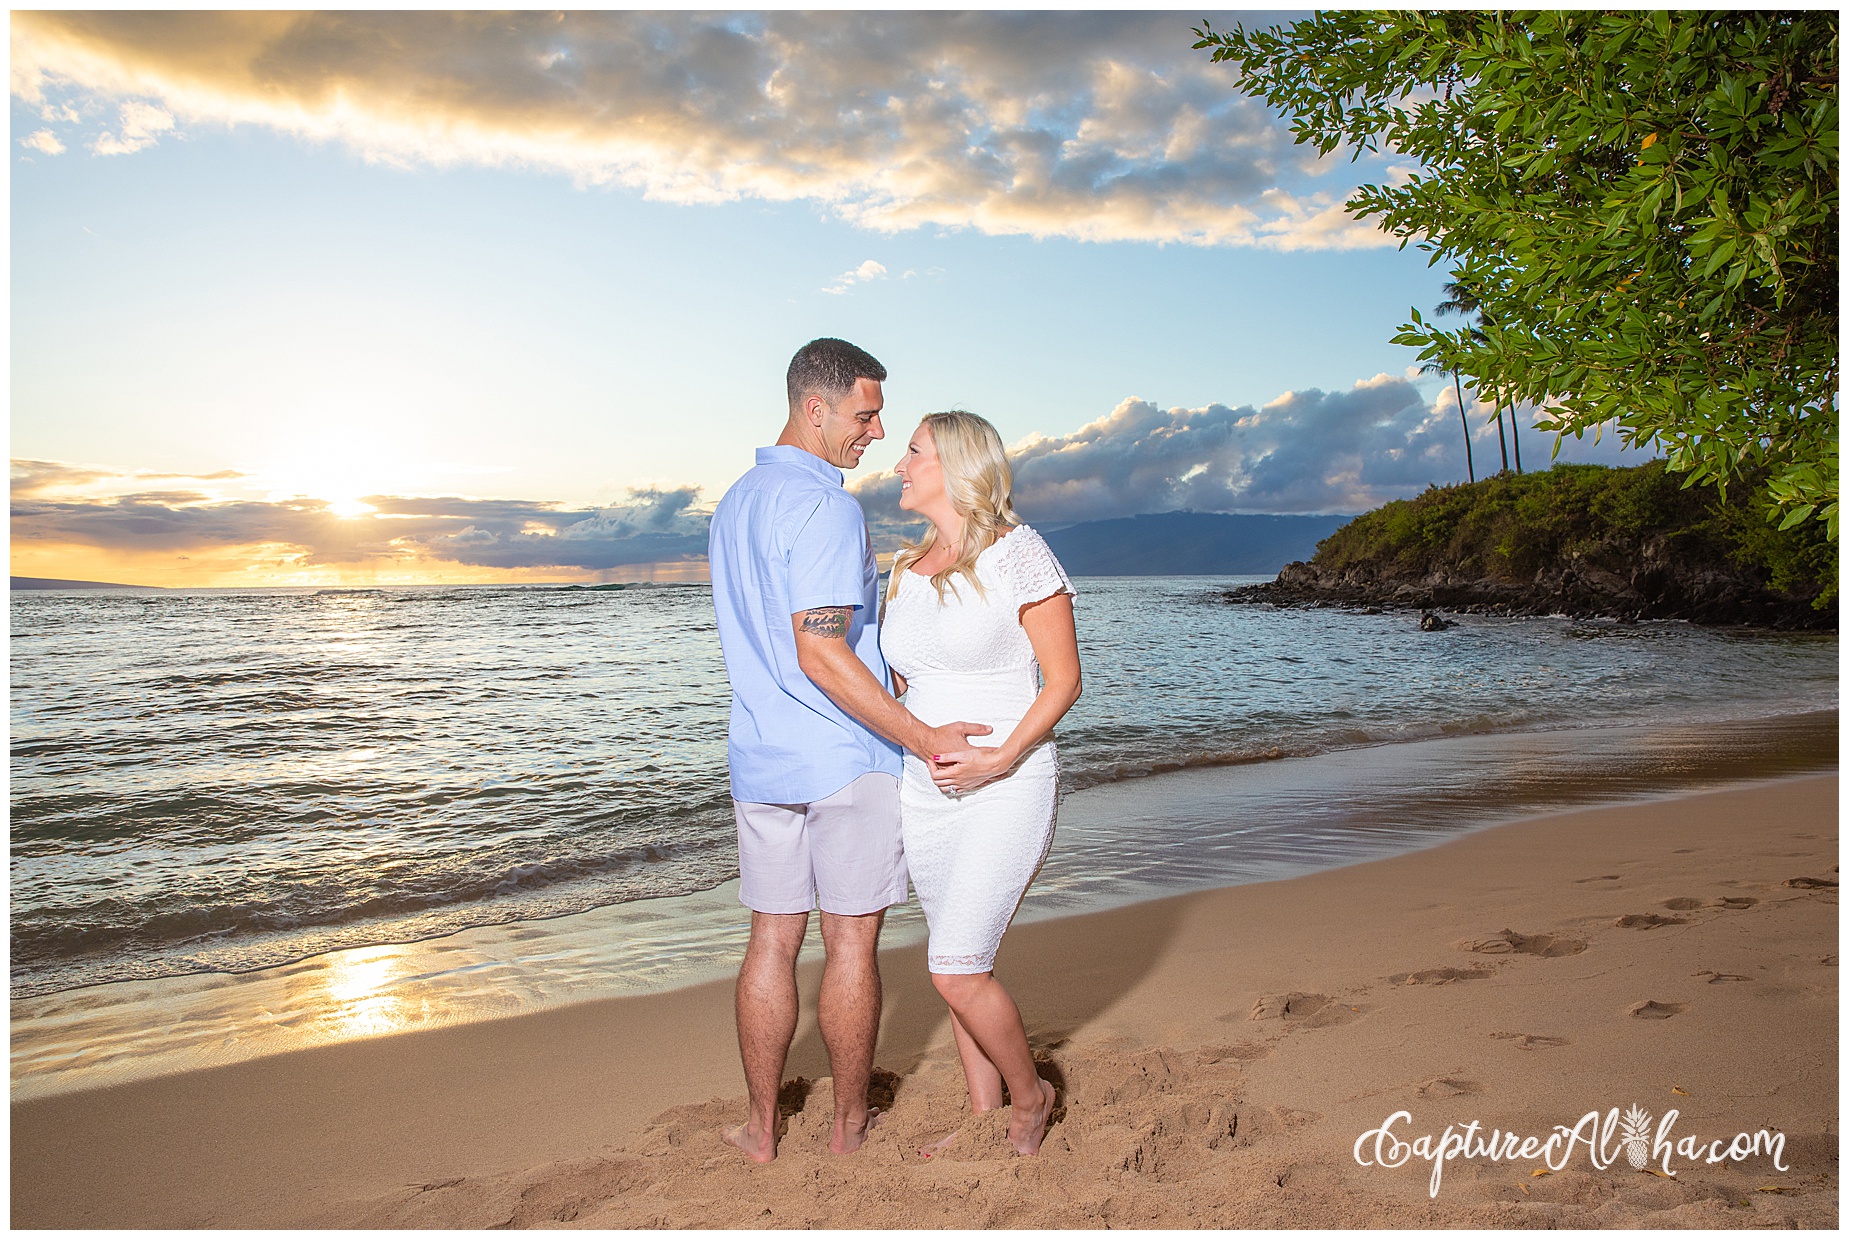 Wife and husband on a maternity photoshoot in Maui on the beach with the sunset